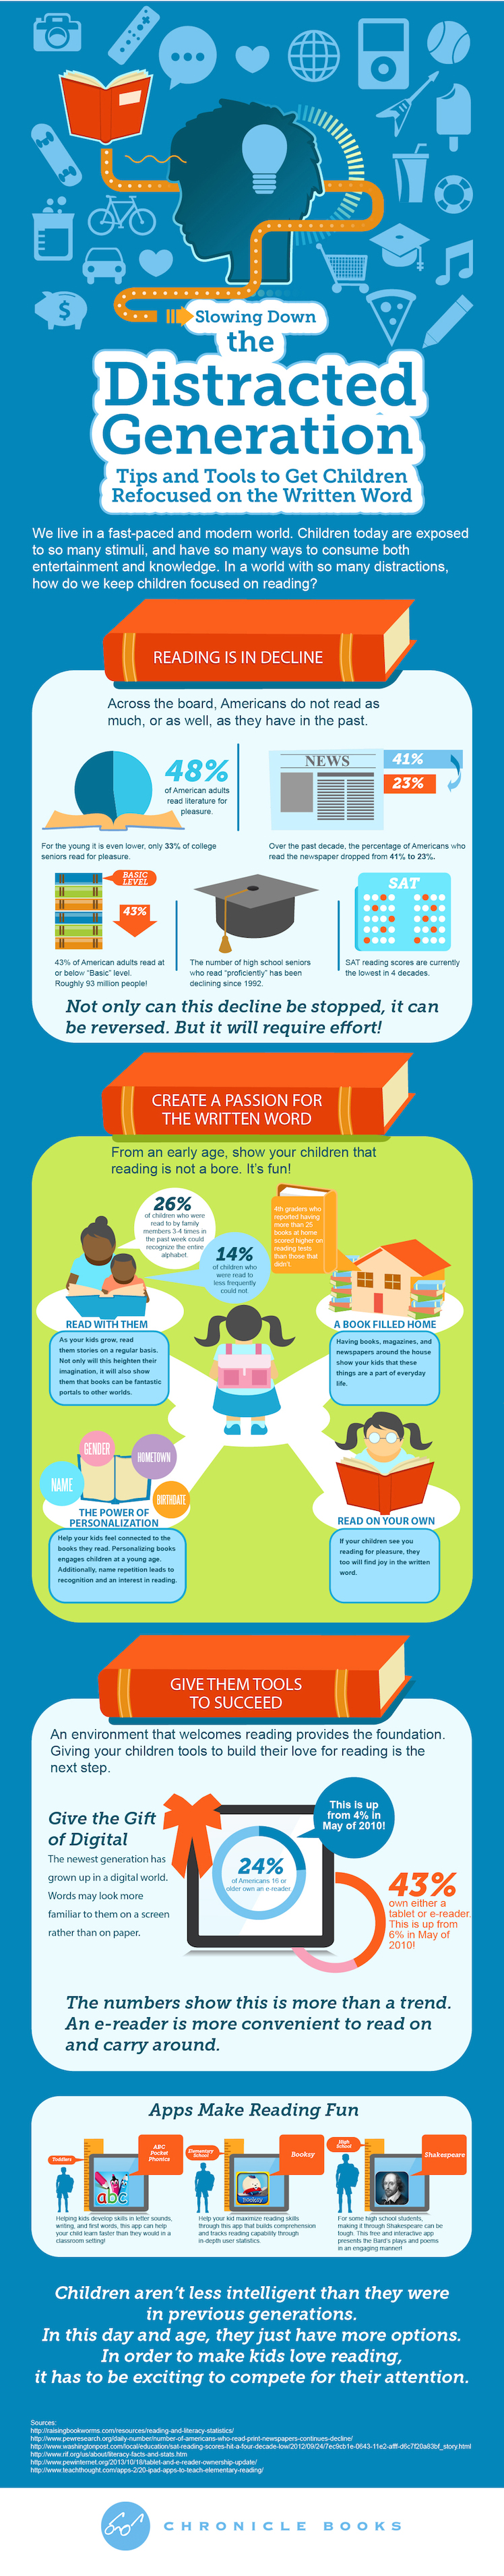 Slowing Down the Distracted Generation #infographic